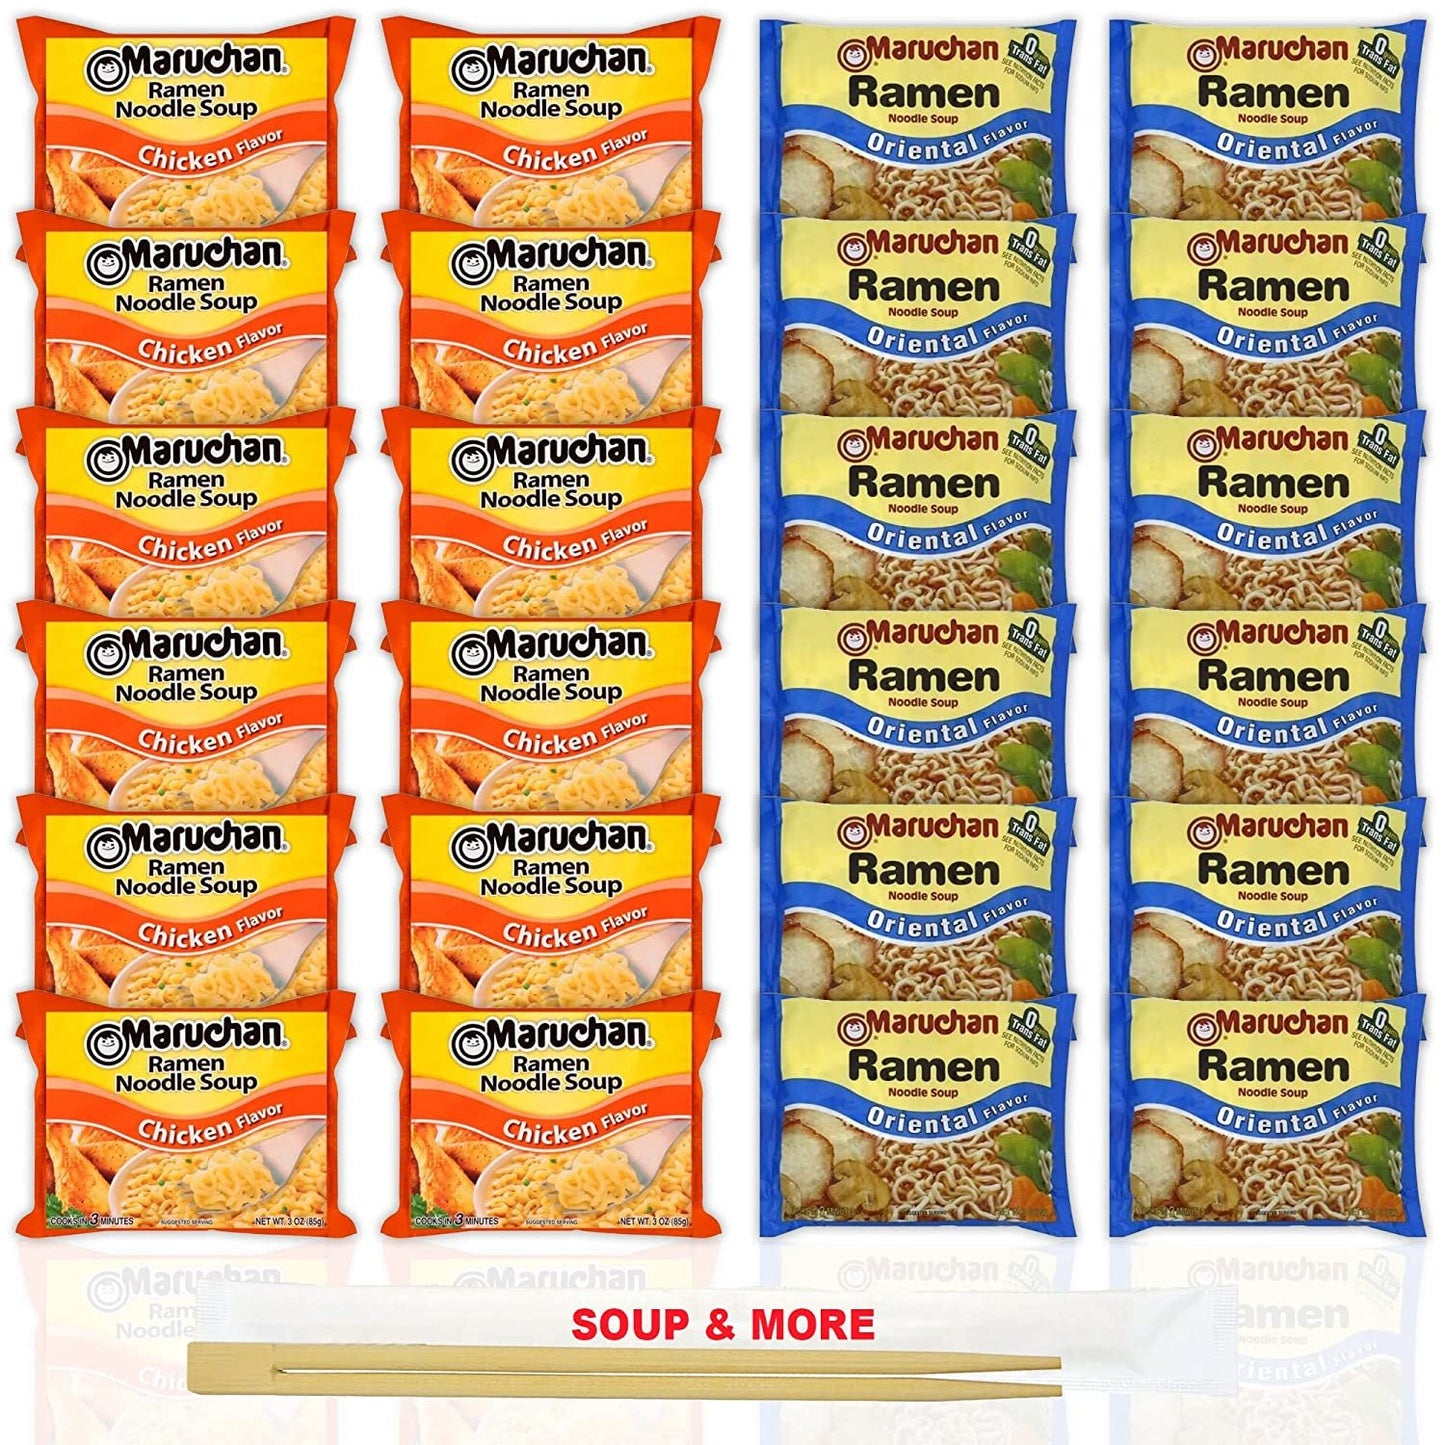 Maruchan Ramen Instant Noodle Soup Variety, 2 Flavors - 12 Packs Chicken & 12 Packs Oriental , 3 Ounce Single Servings Lunch / Dinner Variety